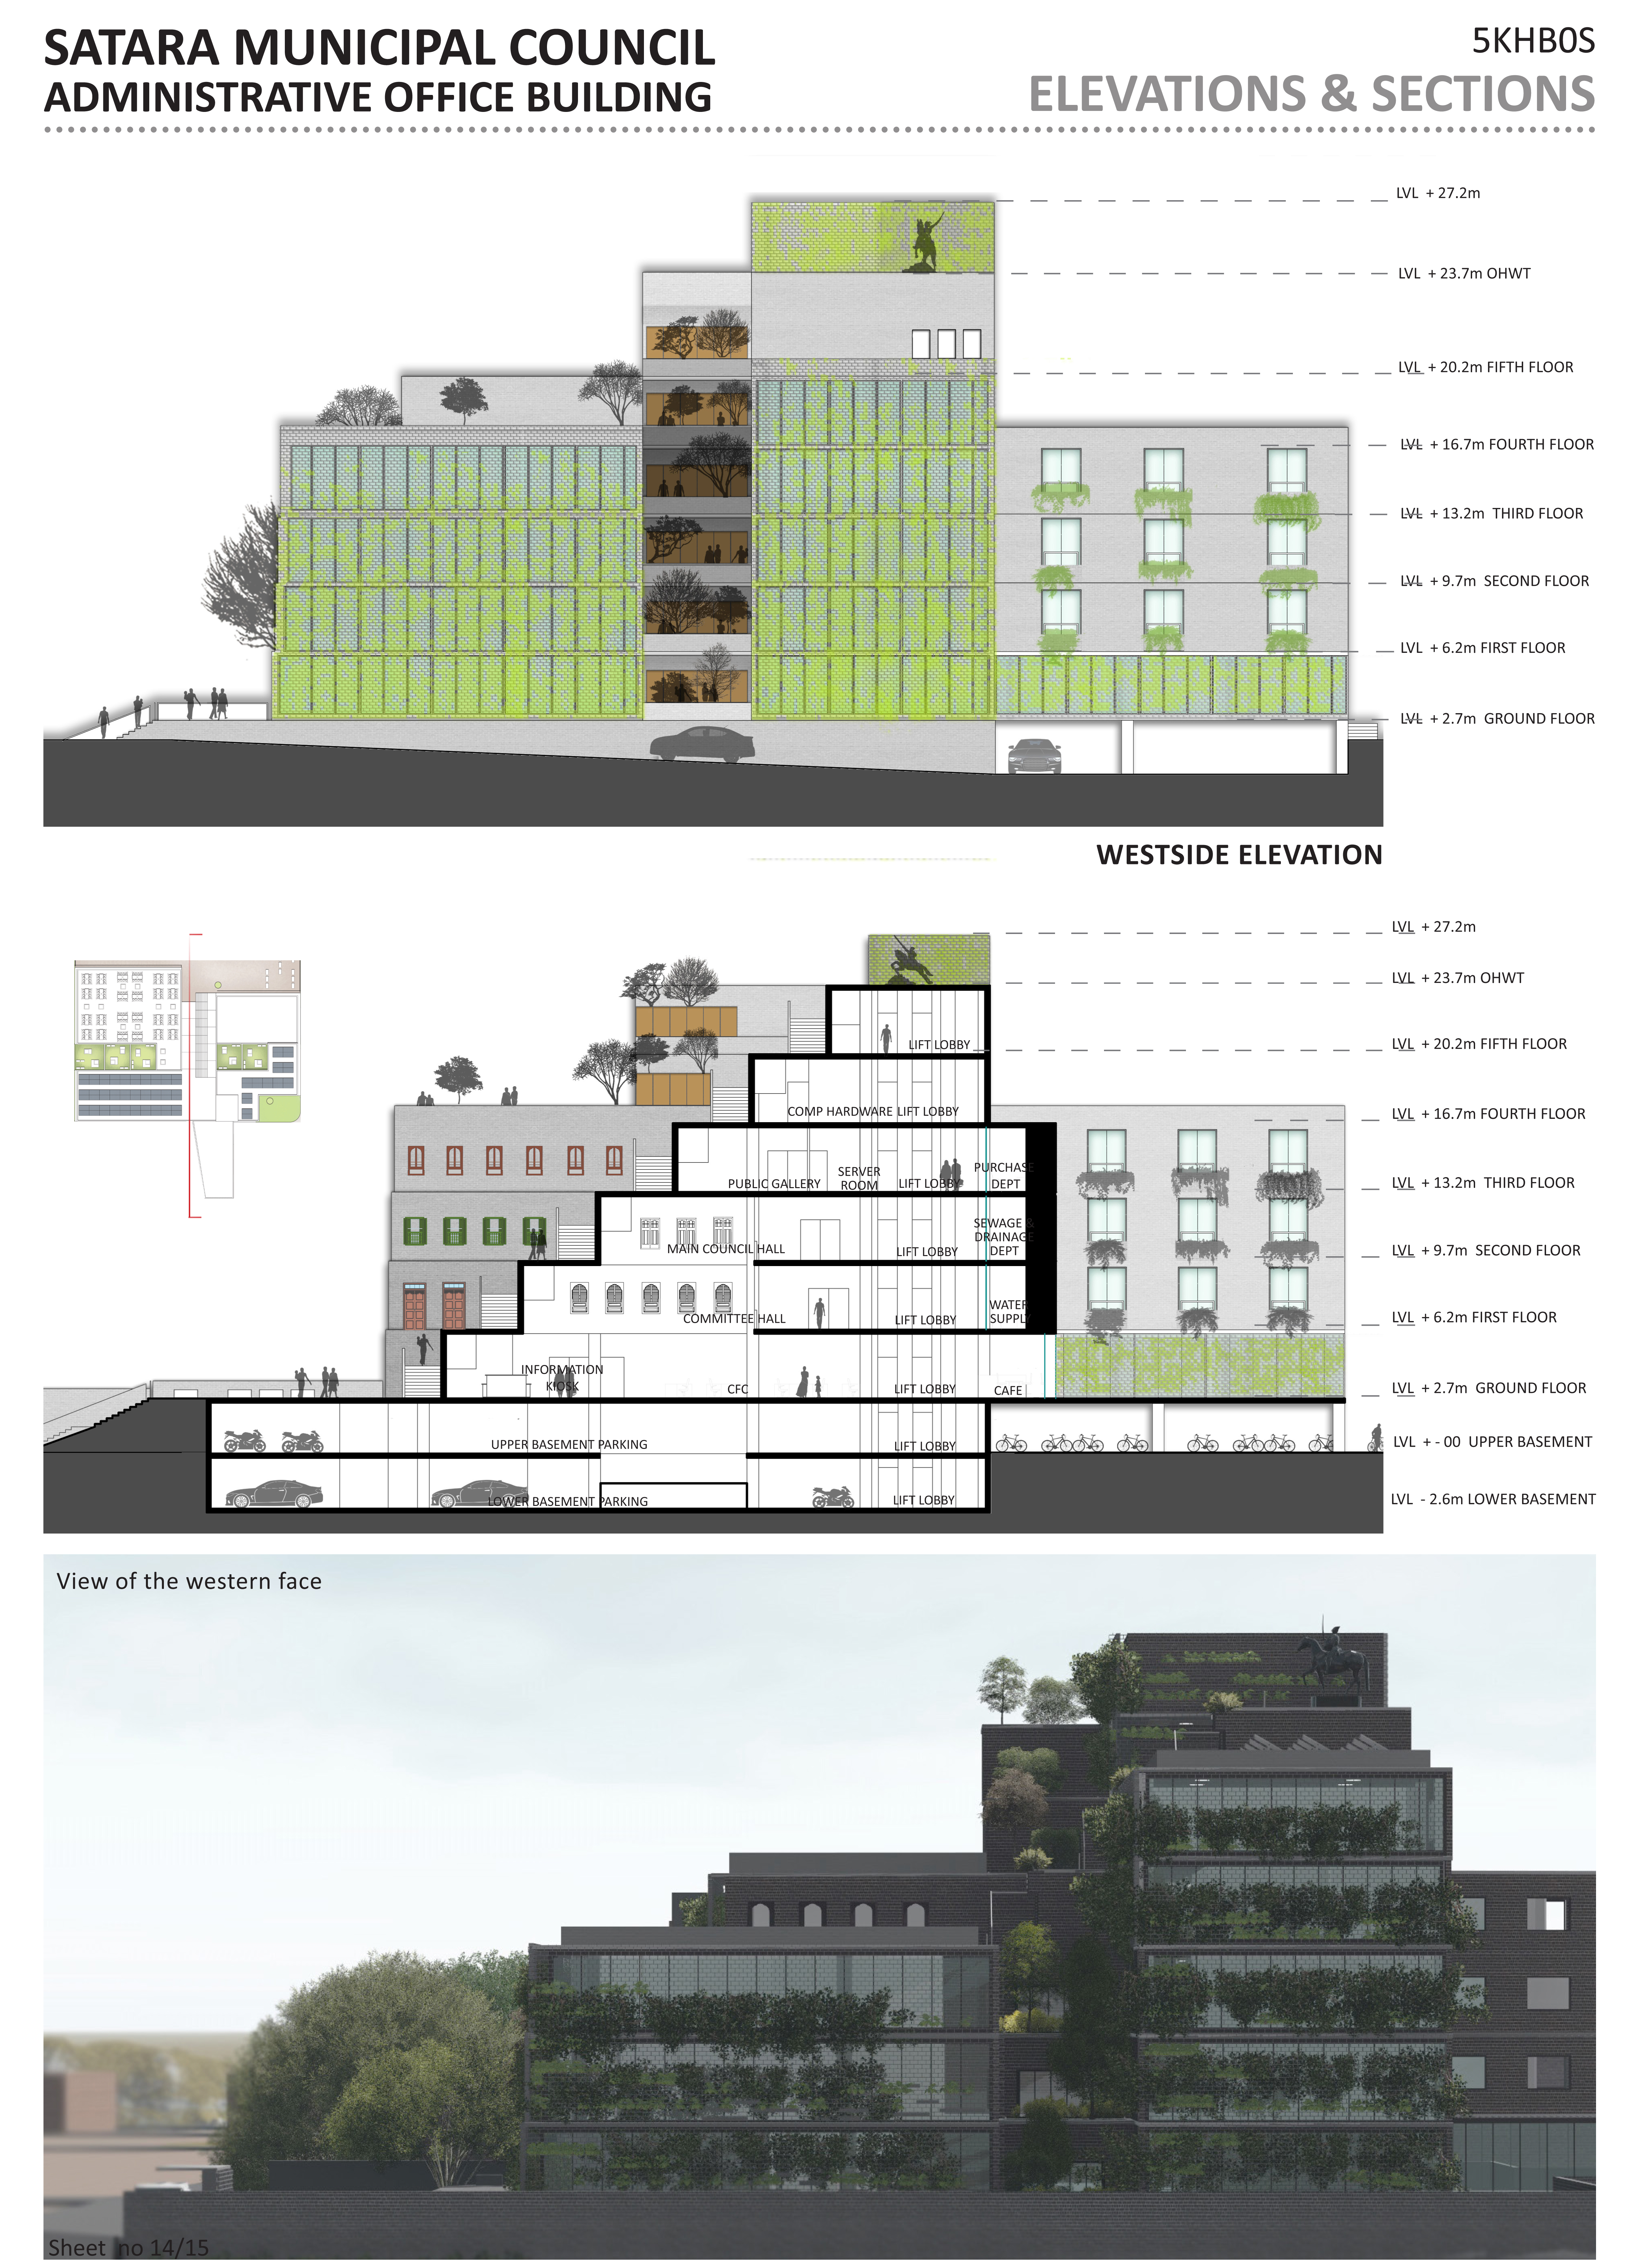 14_ELEVATIONS & SECTIONS